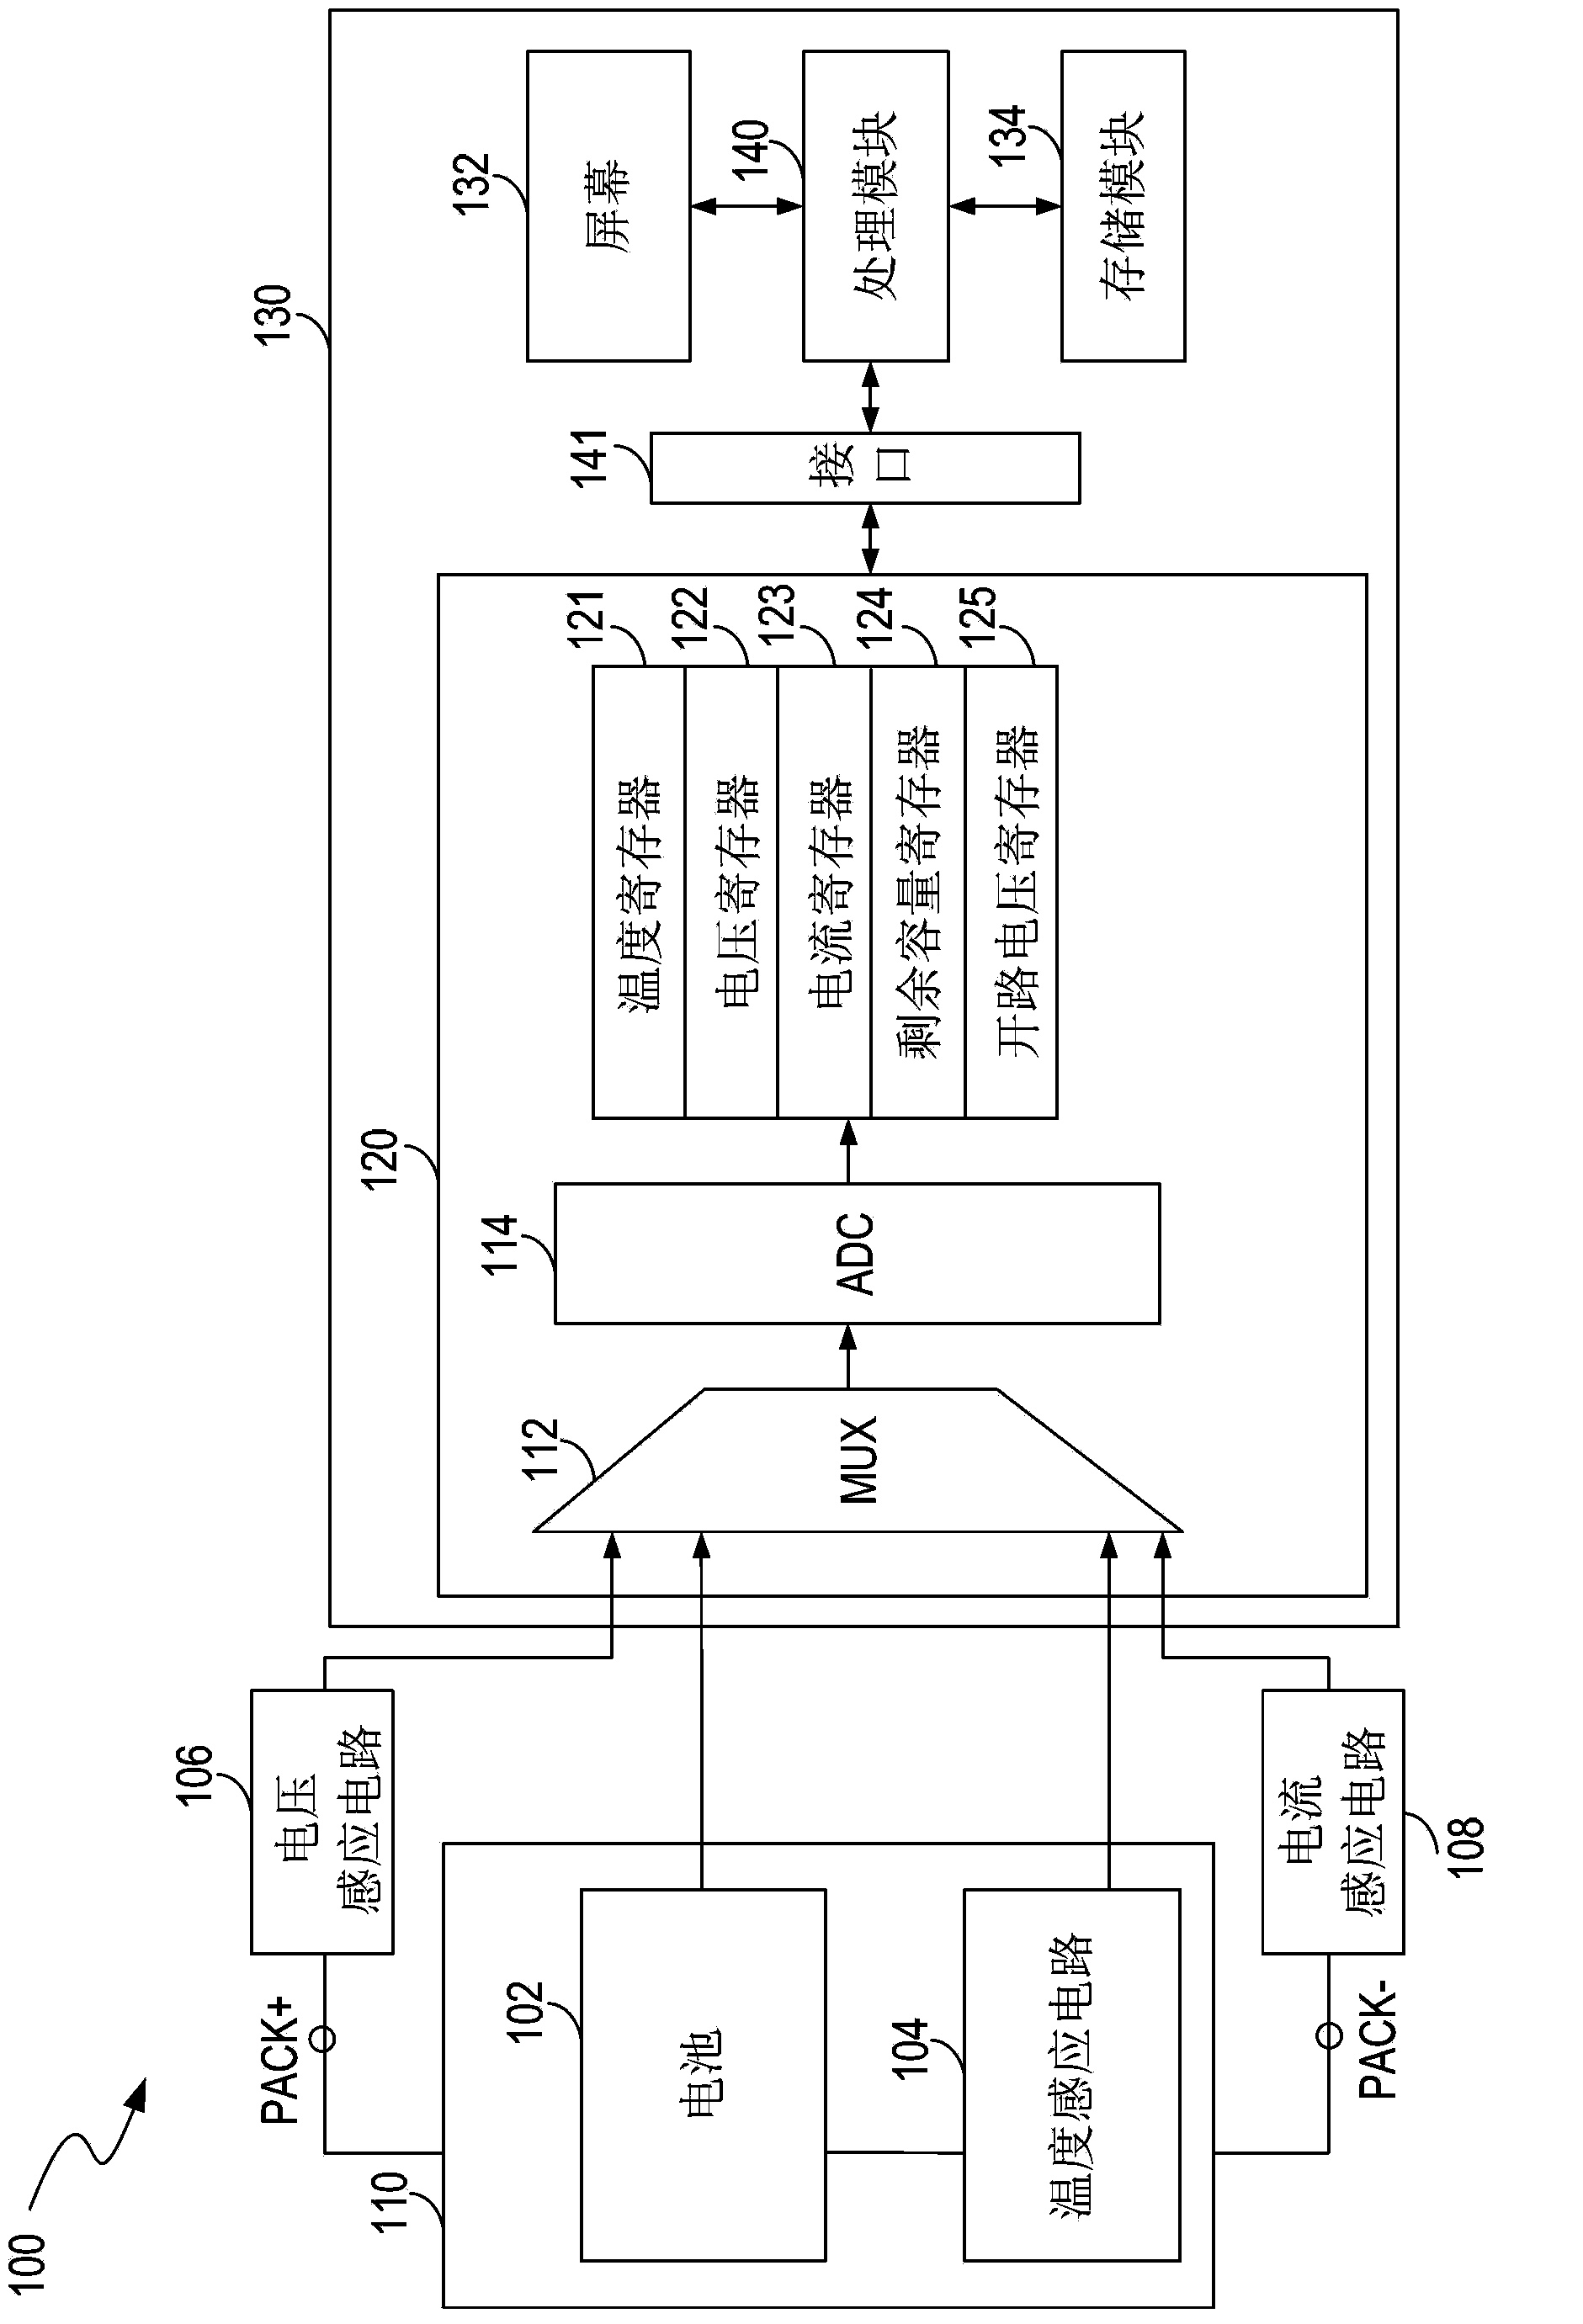 Equipment, method and system for estimating remaining capacity of battery